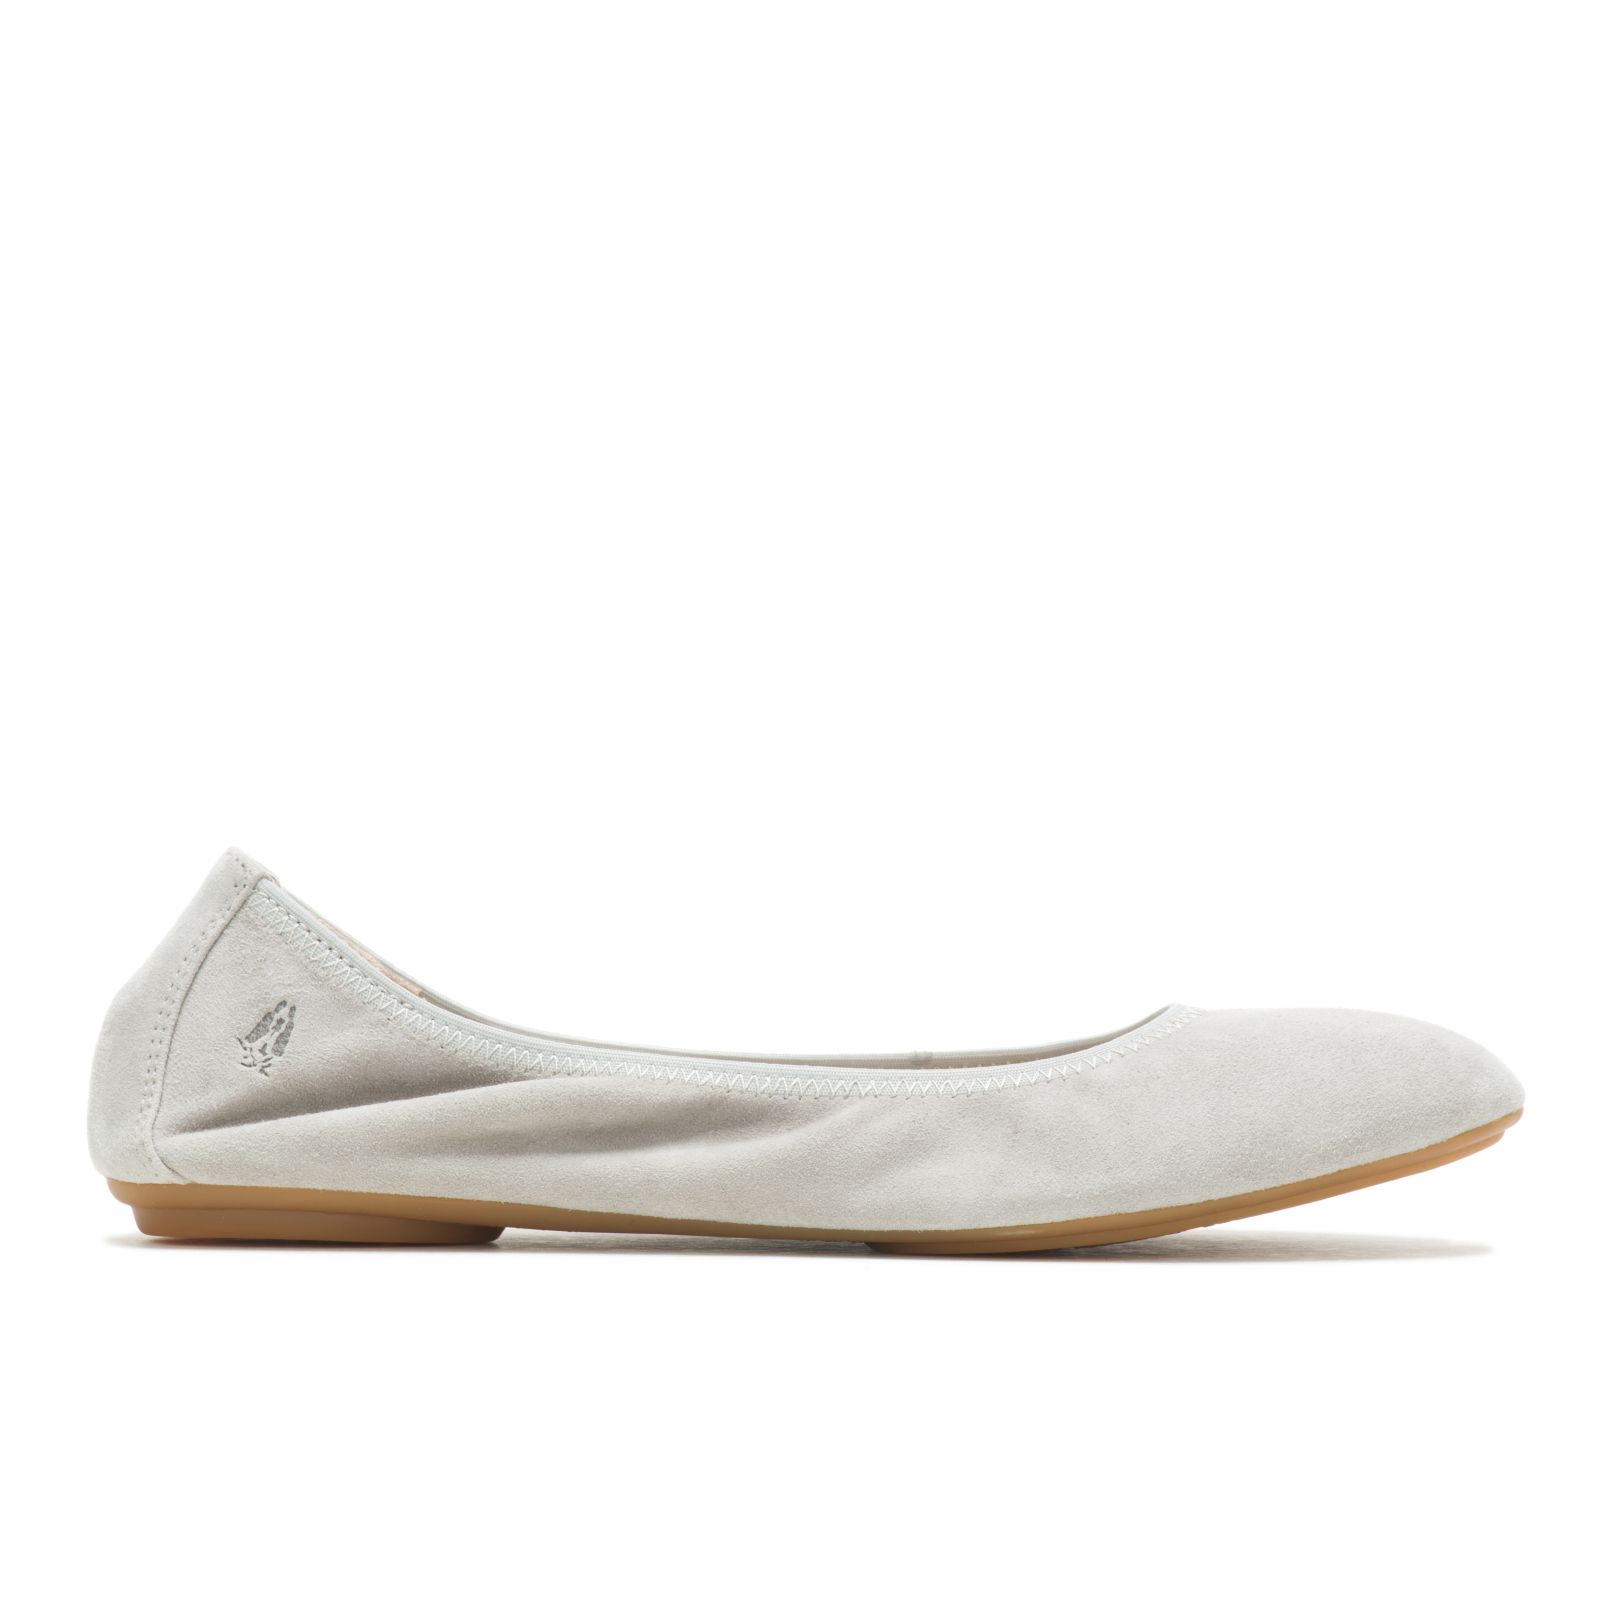 Tenis Planos Hush Puppies Chaste Ballet 2 Mujer Grises | FZRQVBL-21